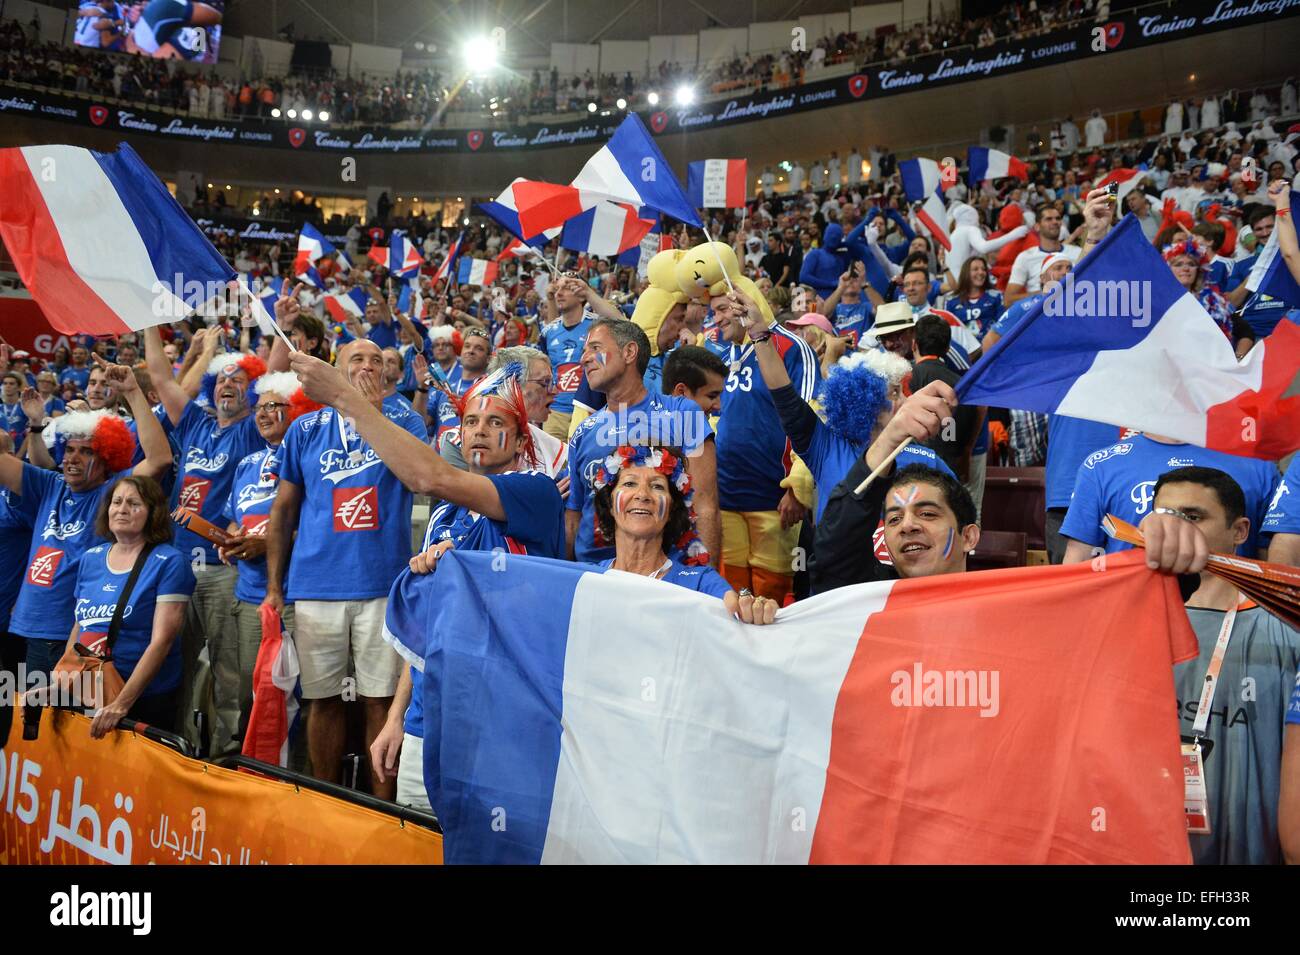 01.02.2015. Qatar, UAE. IHF Mens World Championships Handball final. Qatar versus France.  Supporters of France with flags and face paint France beat Qatar in the final by a score of 25-22. Stock Photo